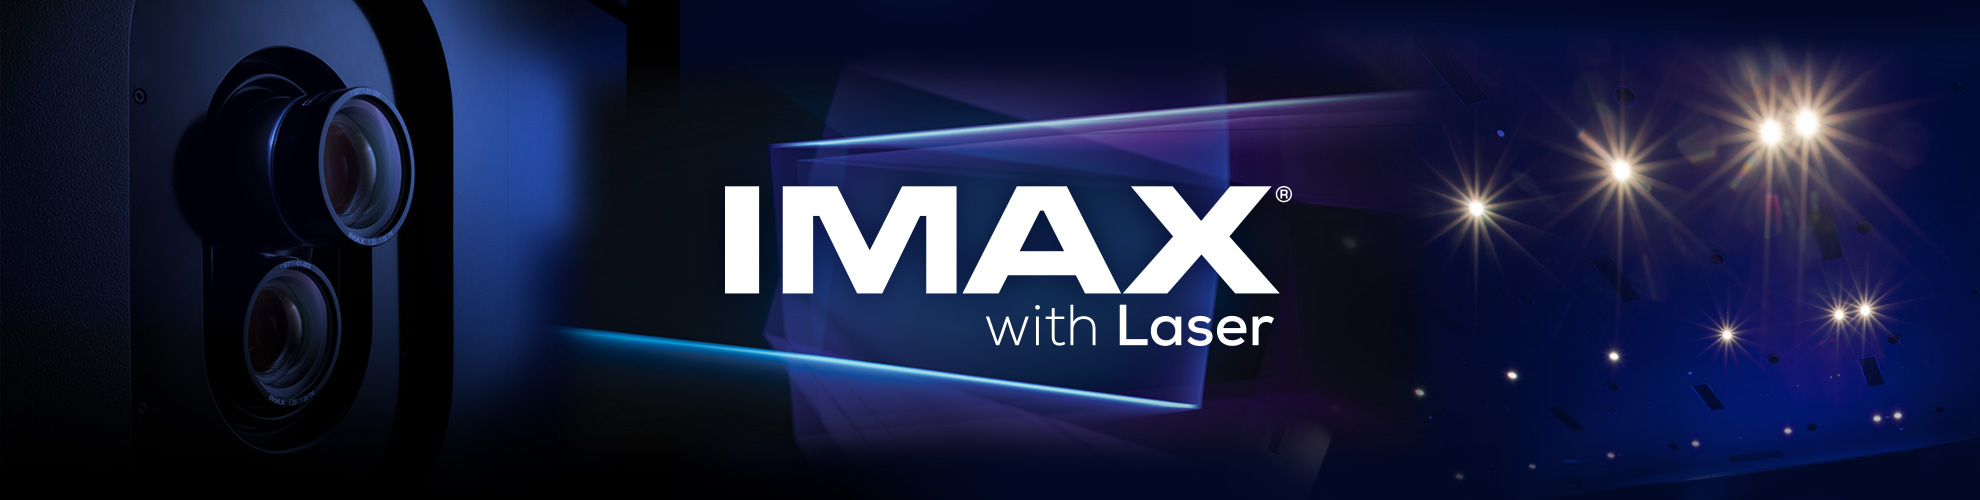 IMAX® with Laser